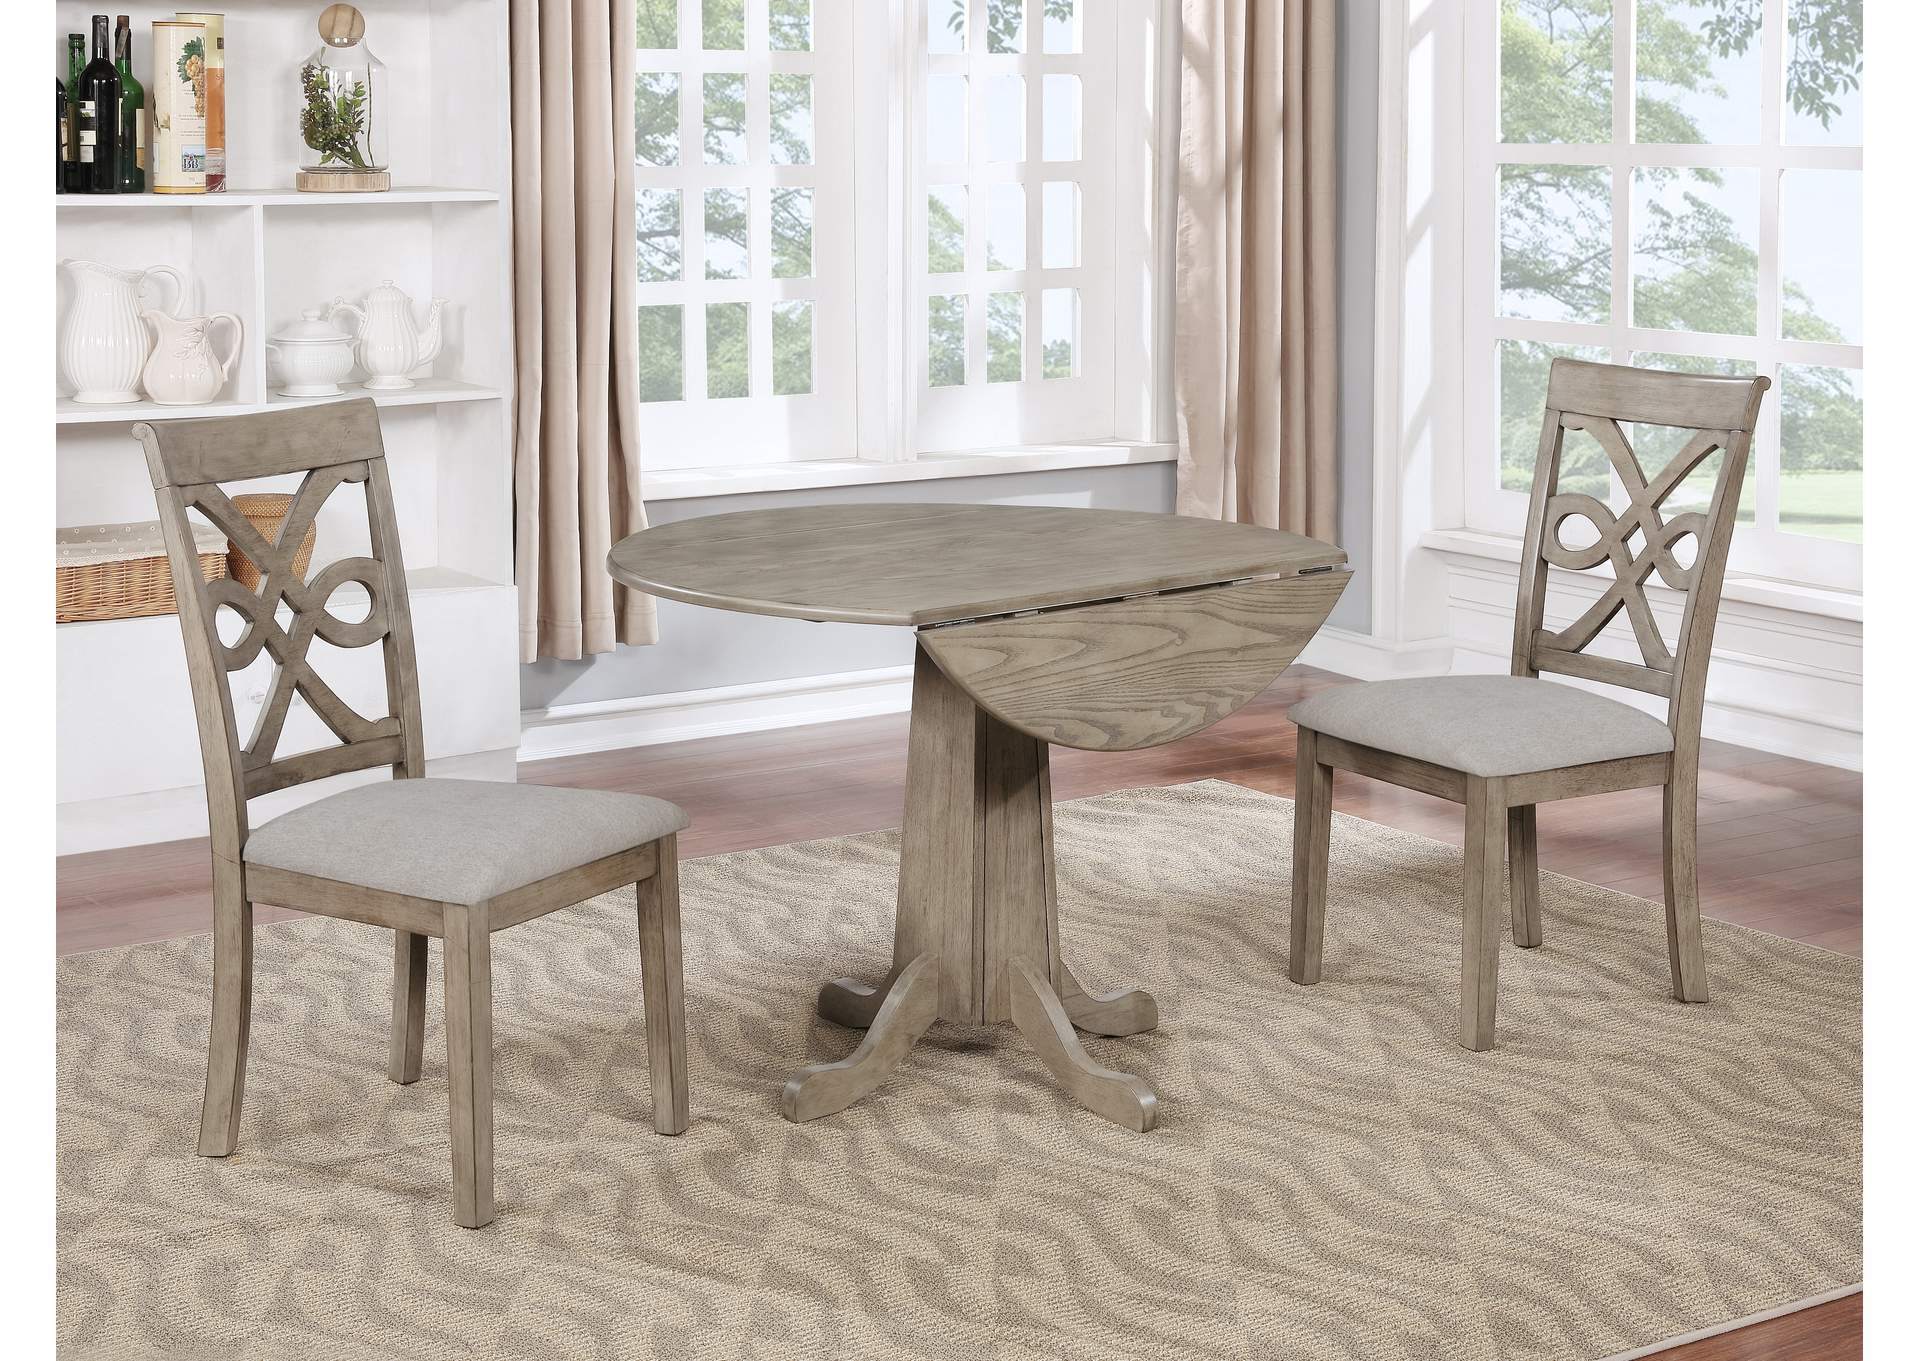 3 Piece Dining Set,Global Trading